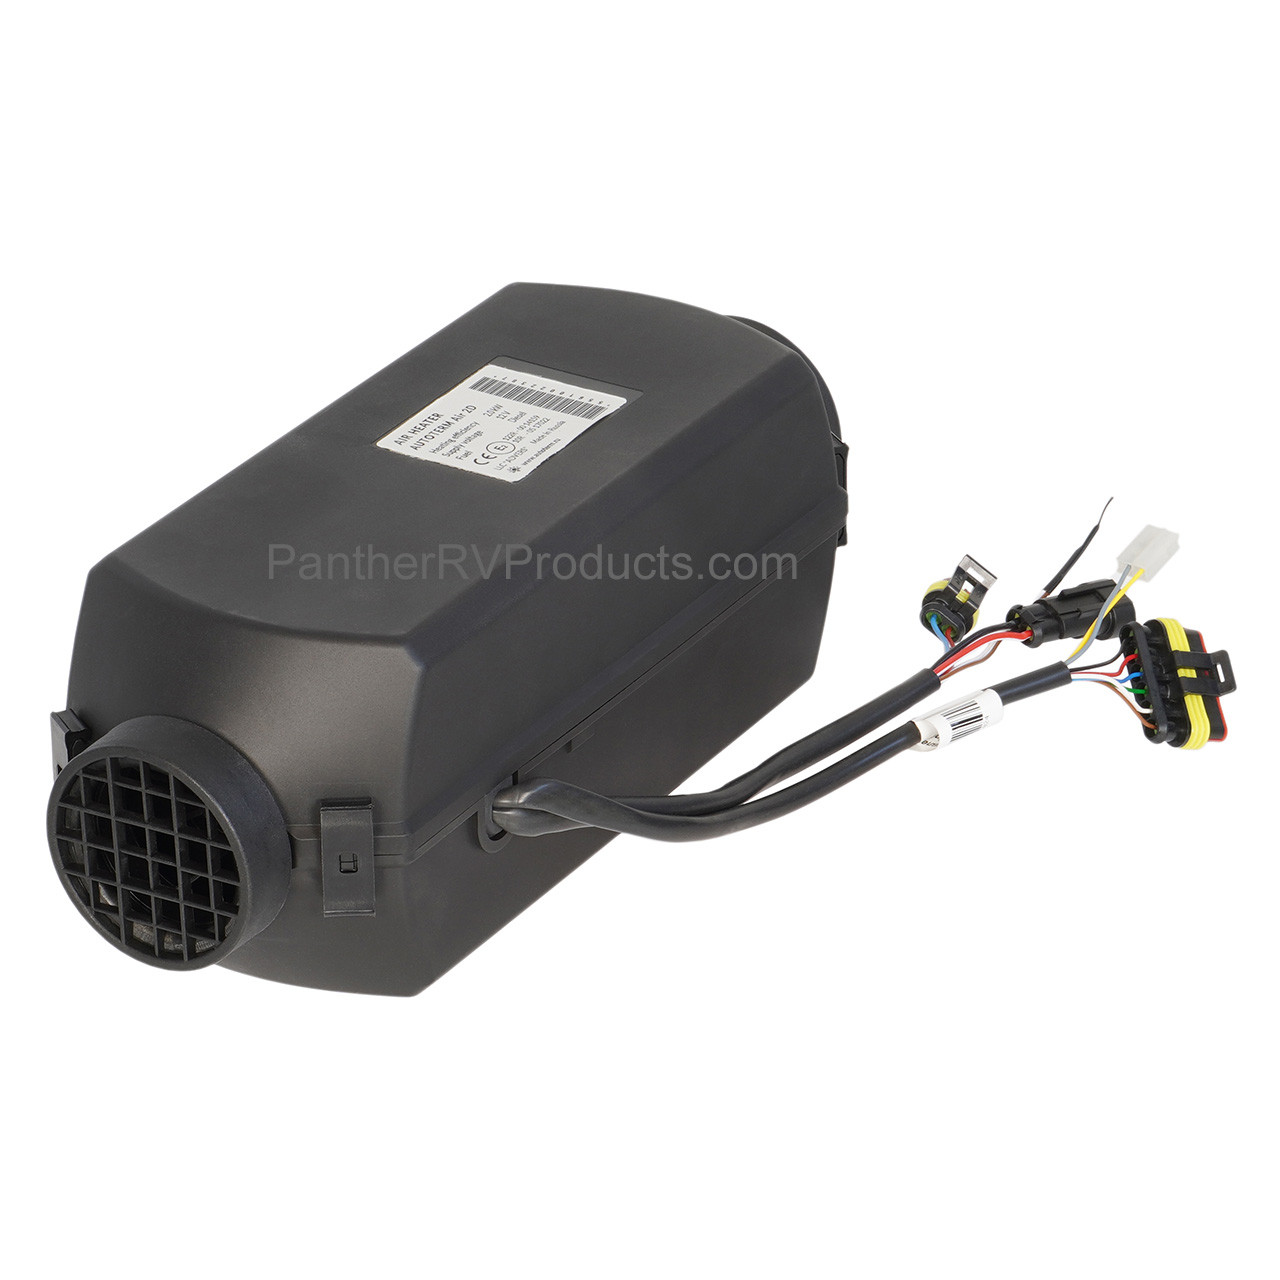 T5/T6 Autoterm Air 2D DELUXE URAL EDITION diesel air heater 2kW